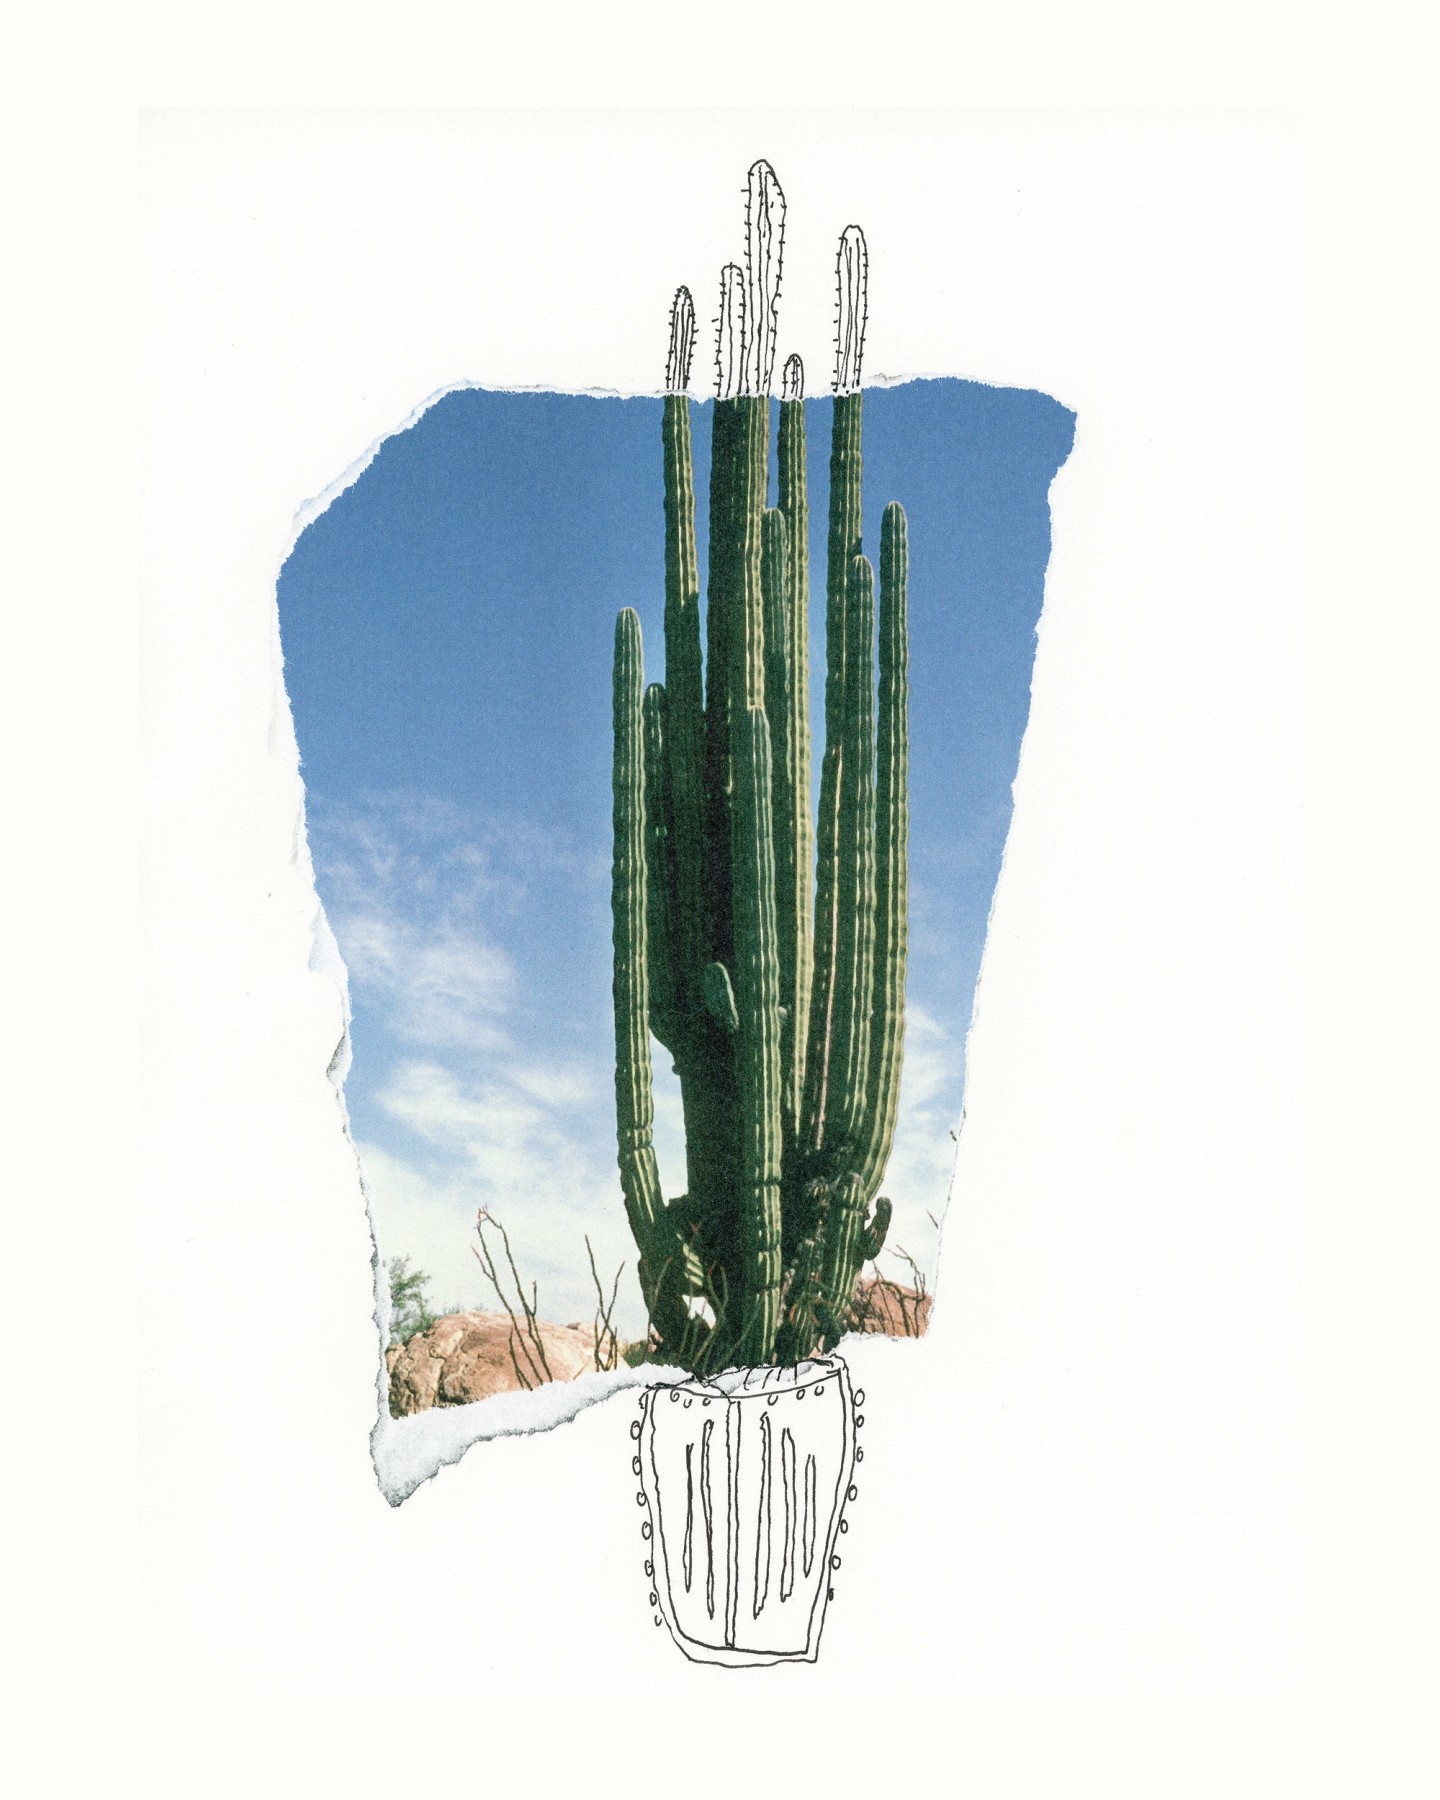 Michael Stiegler  Cactus Solo (unframed), 2019 art from the exhibition on Bowery at Lone Goat Gallery